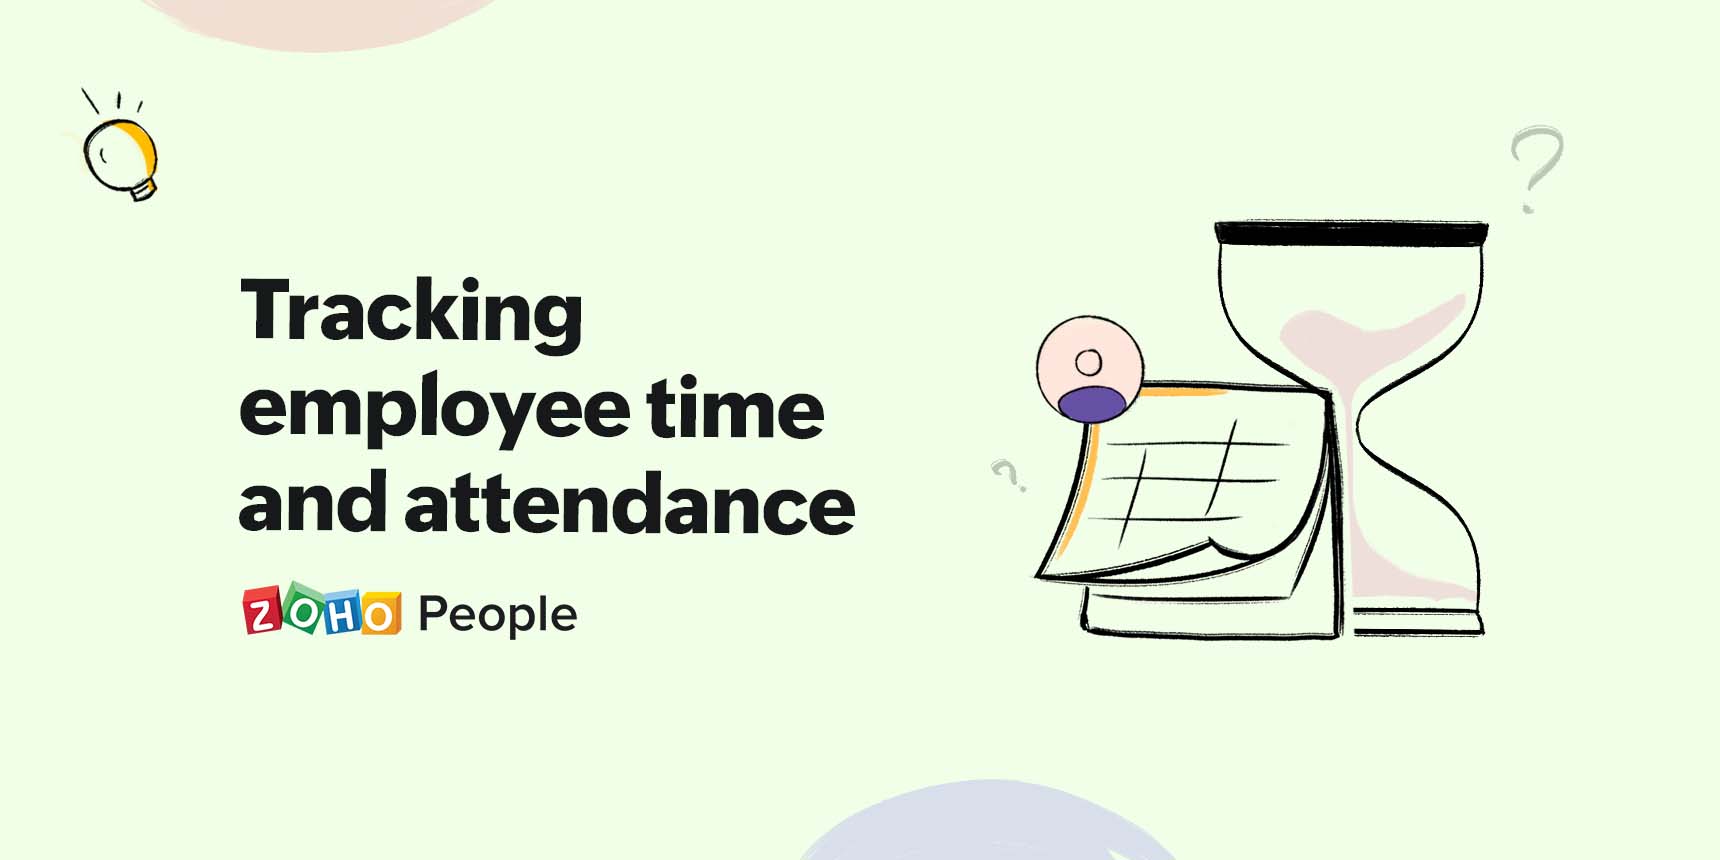 4 different ways to track employee time and attendance